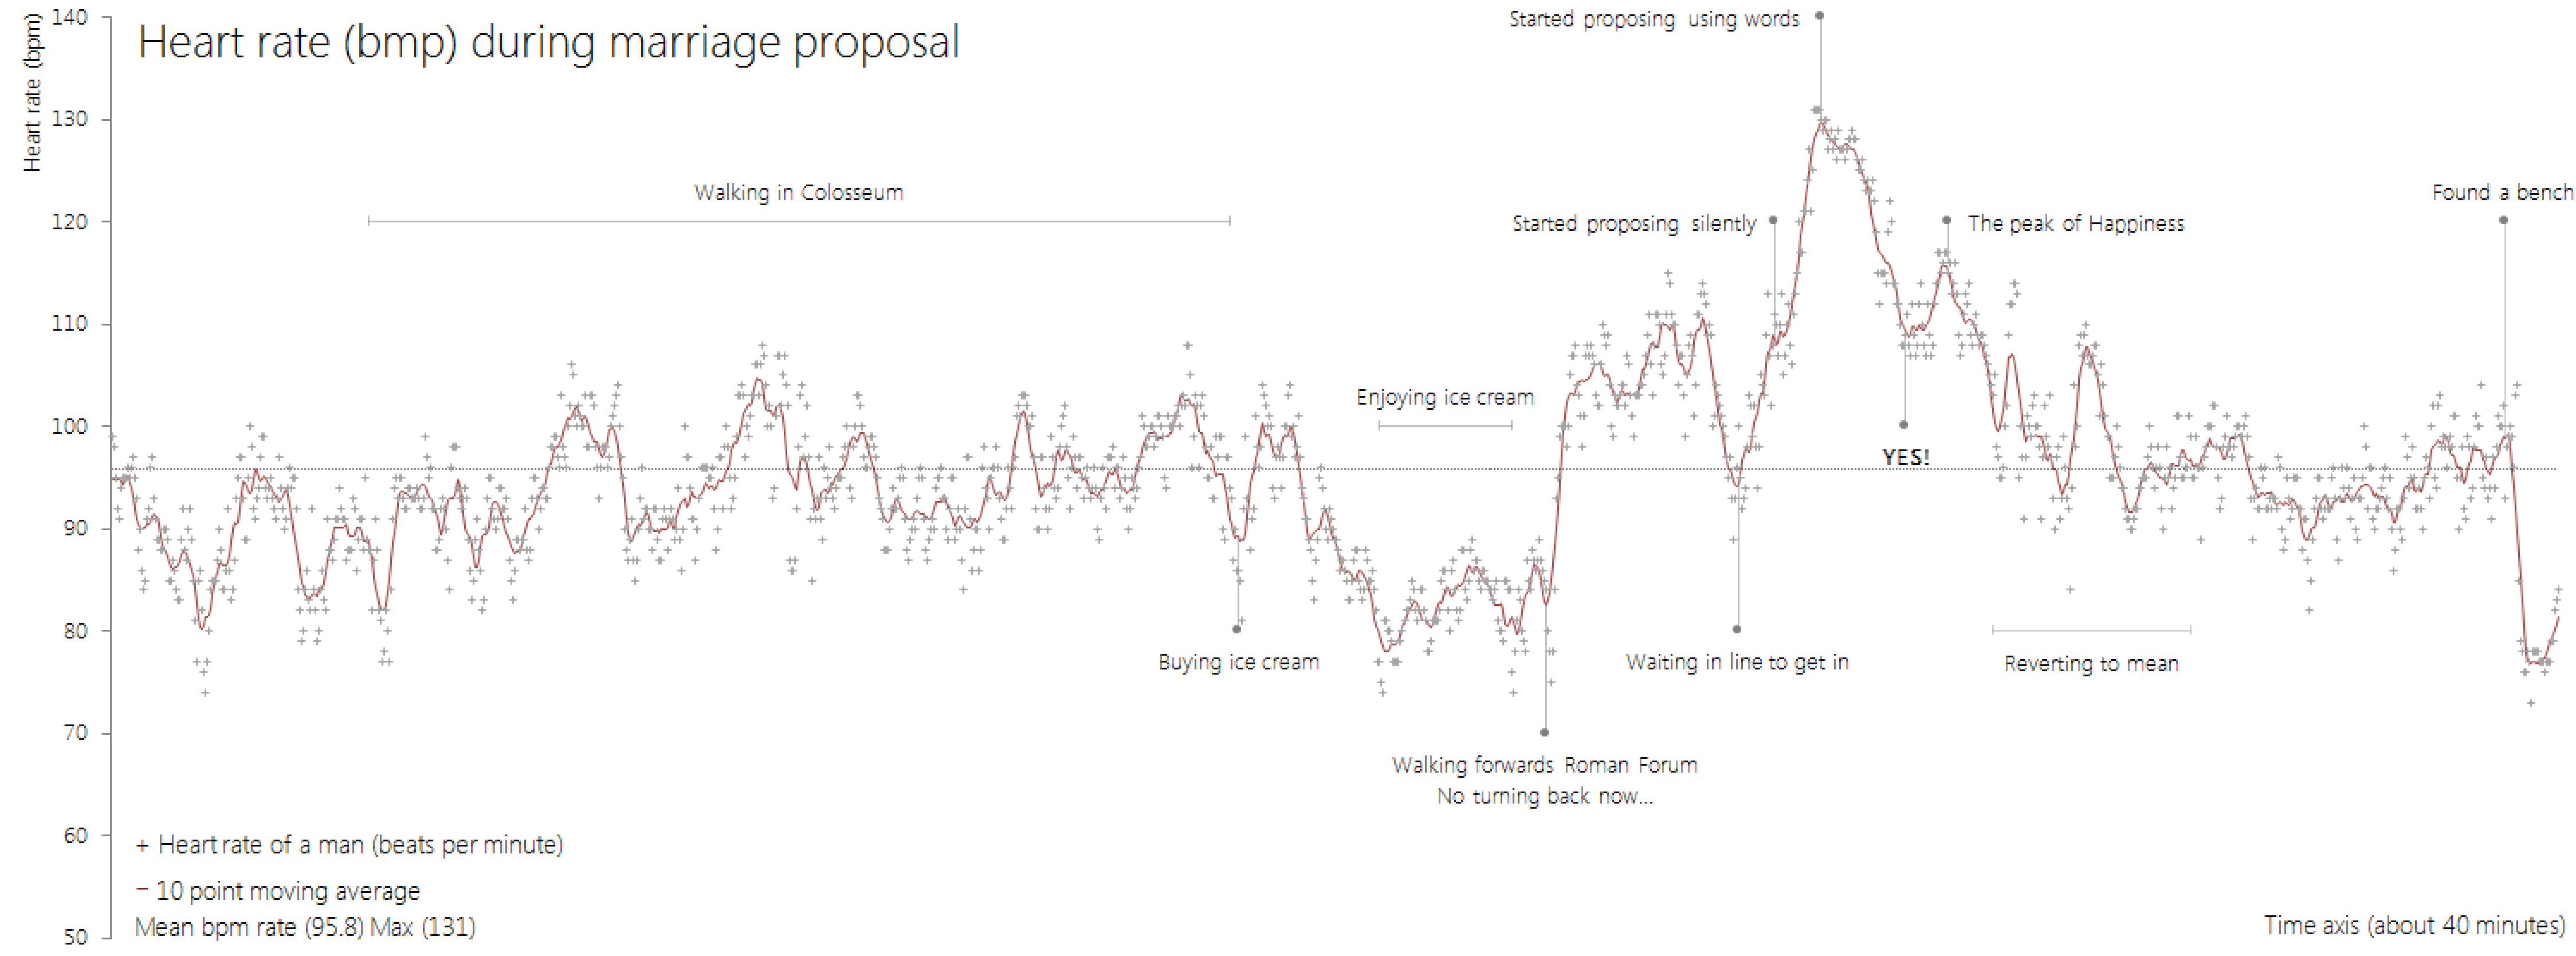 The same chart as above, but with annotations explaining what happened before, during and after the proposal